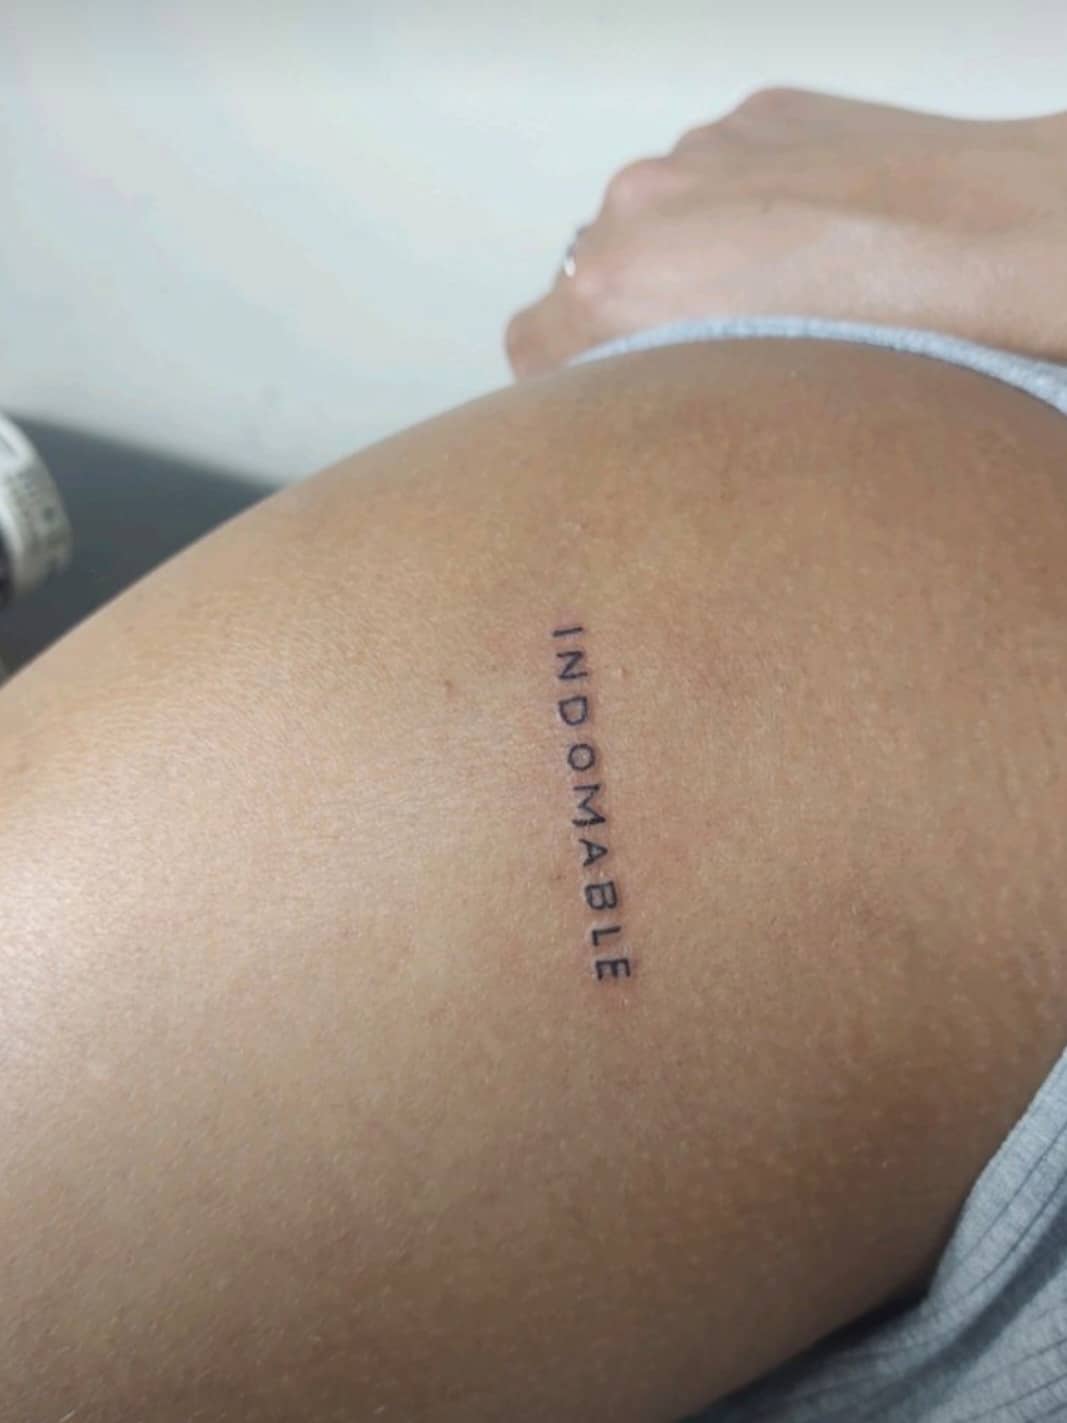 Frases para tatuarse - Indomable